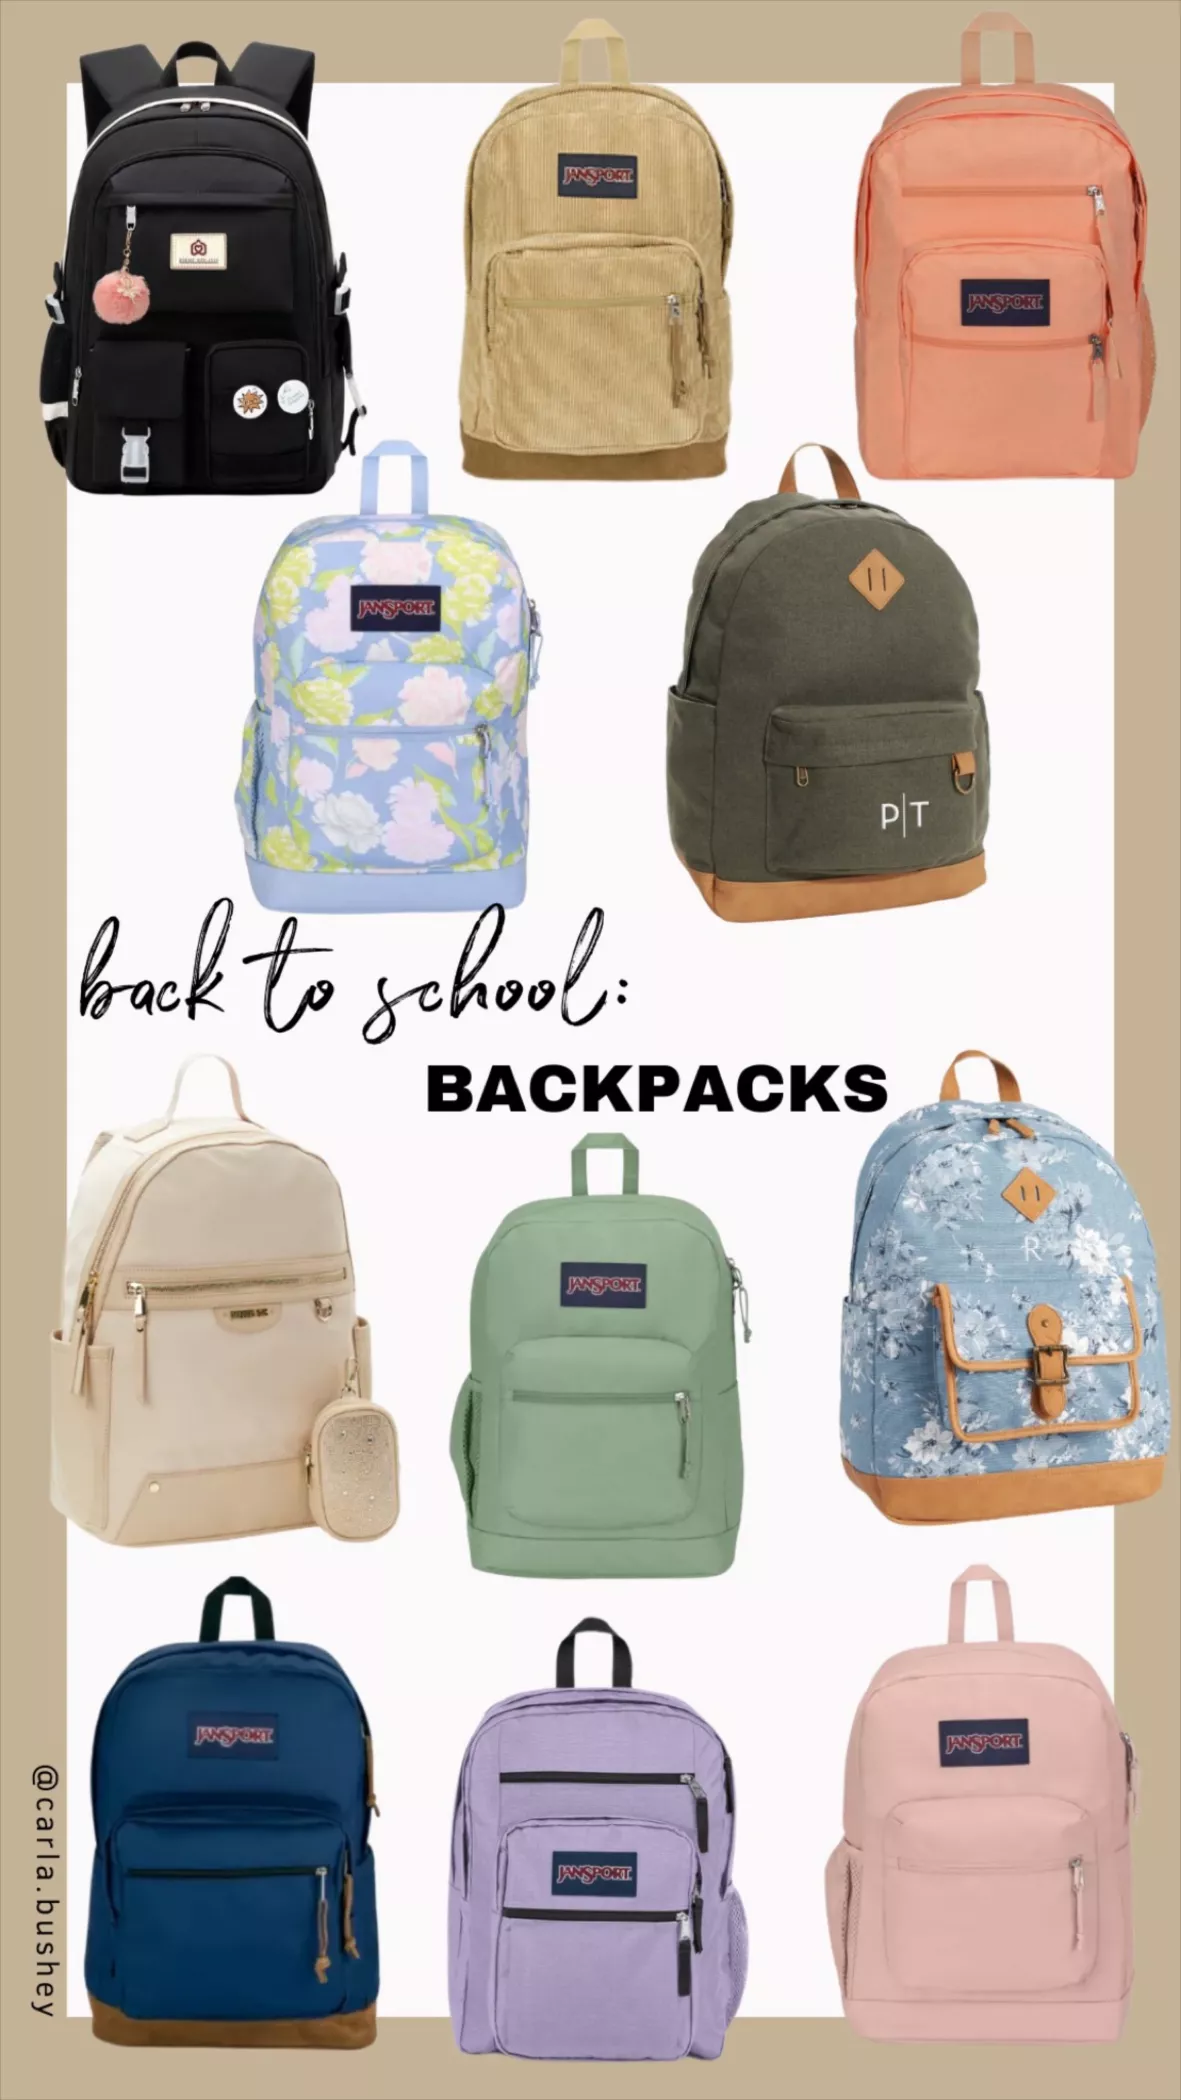 The Backpack Is Back: Back-to-School Options for Adults